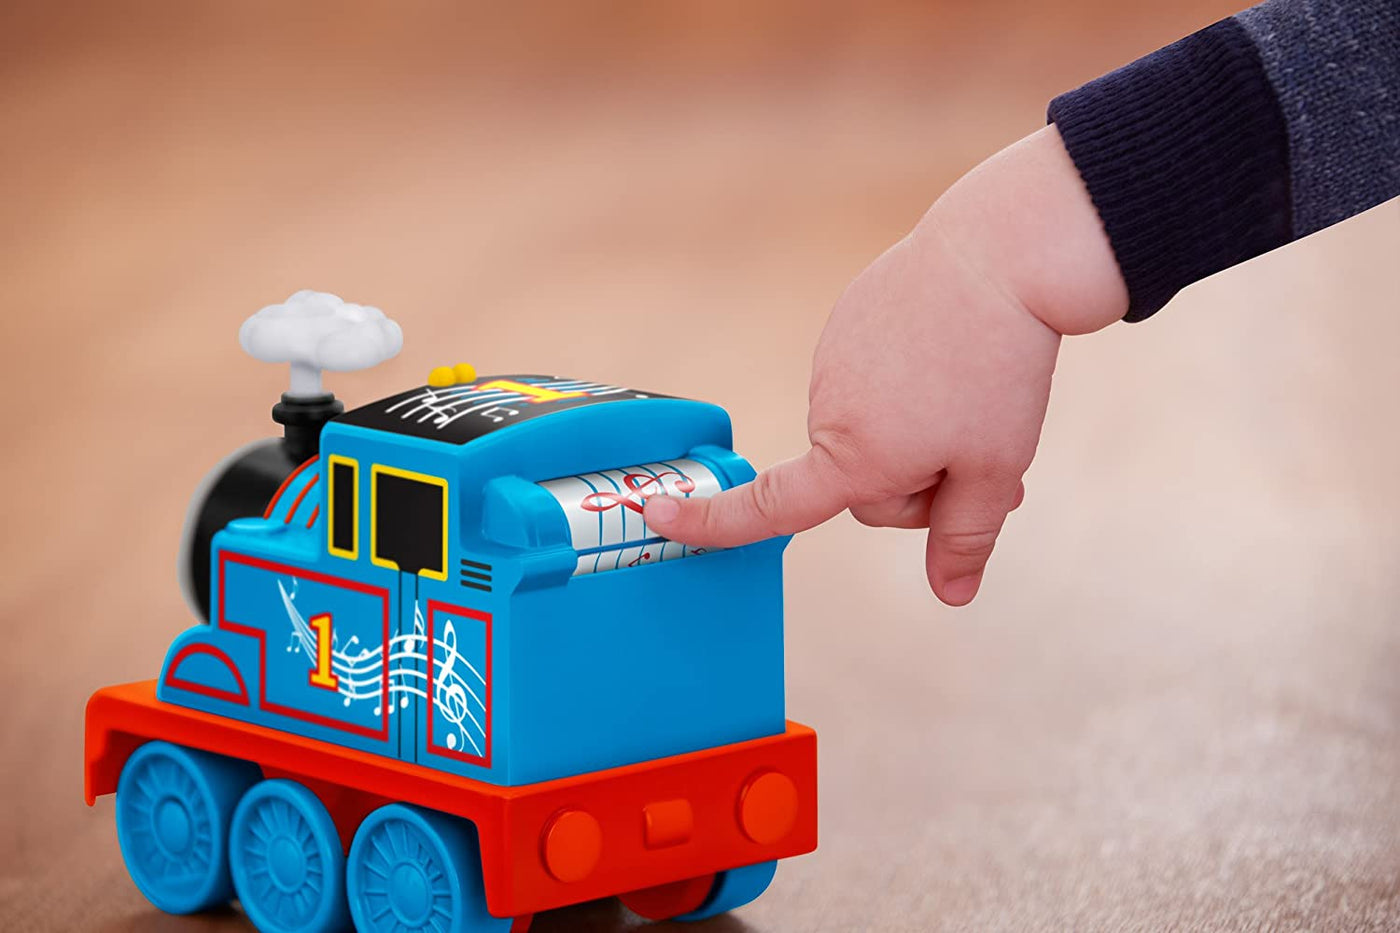 Thomas & Friends: Rolling Melodies Thomas | Fisher Price by Fisher-Price Toy